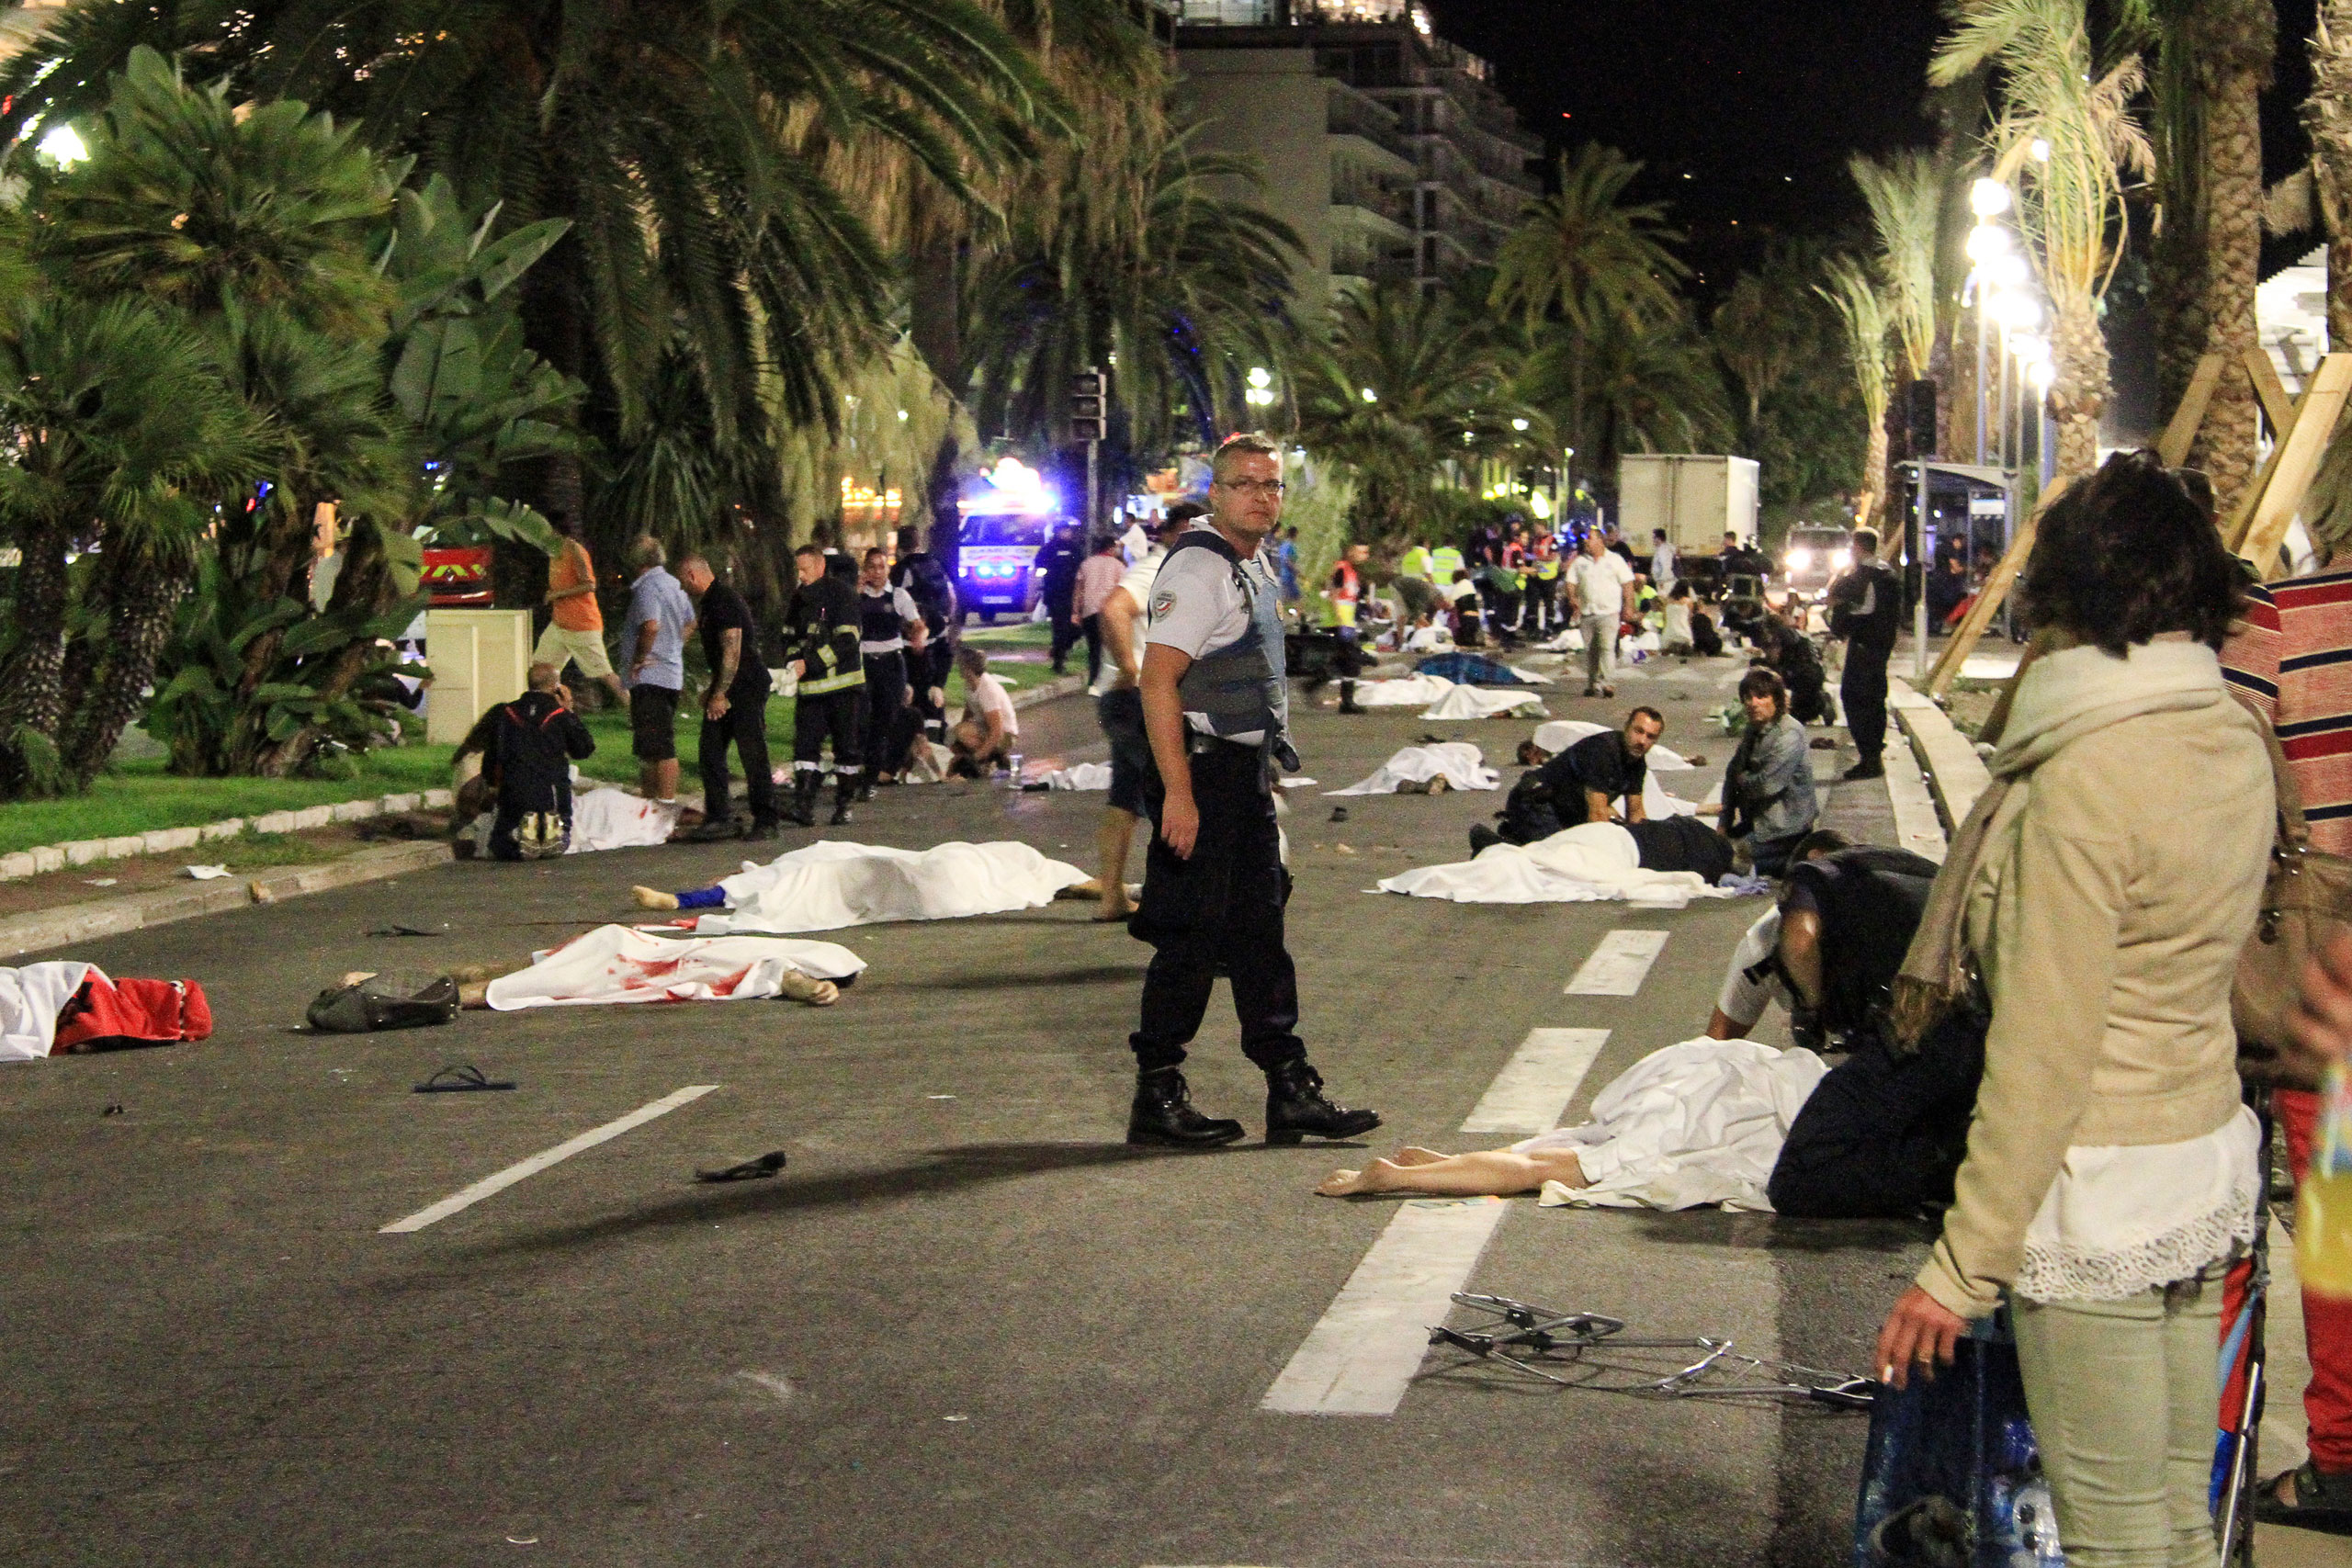 More than 80 people were killed in the July 14 terrorist attack in the southern French city of Nice (Antoine Chauvel)